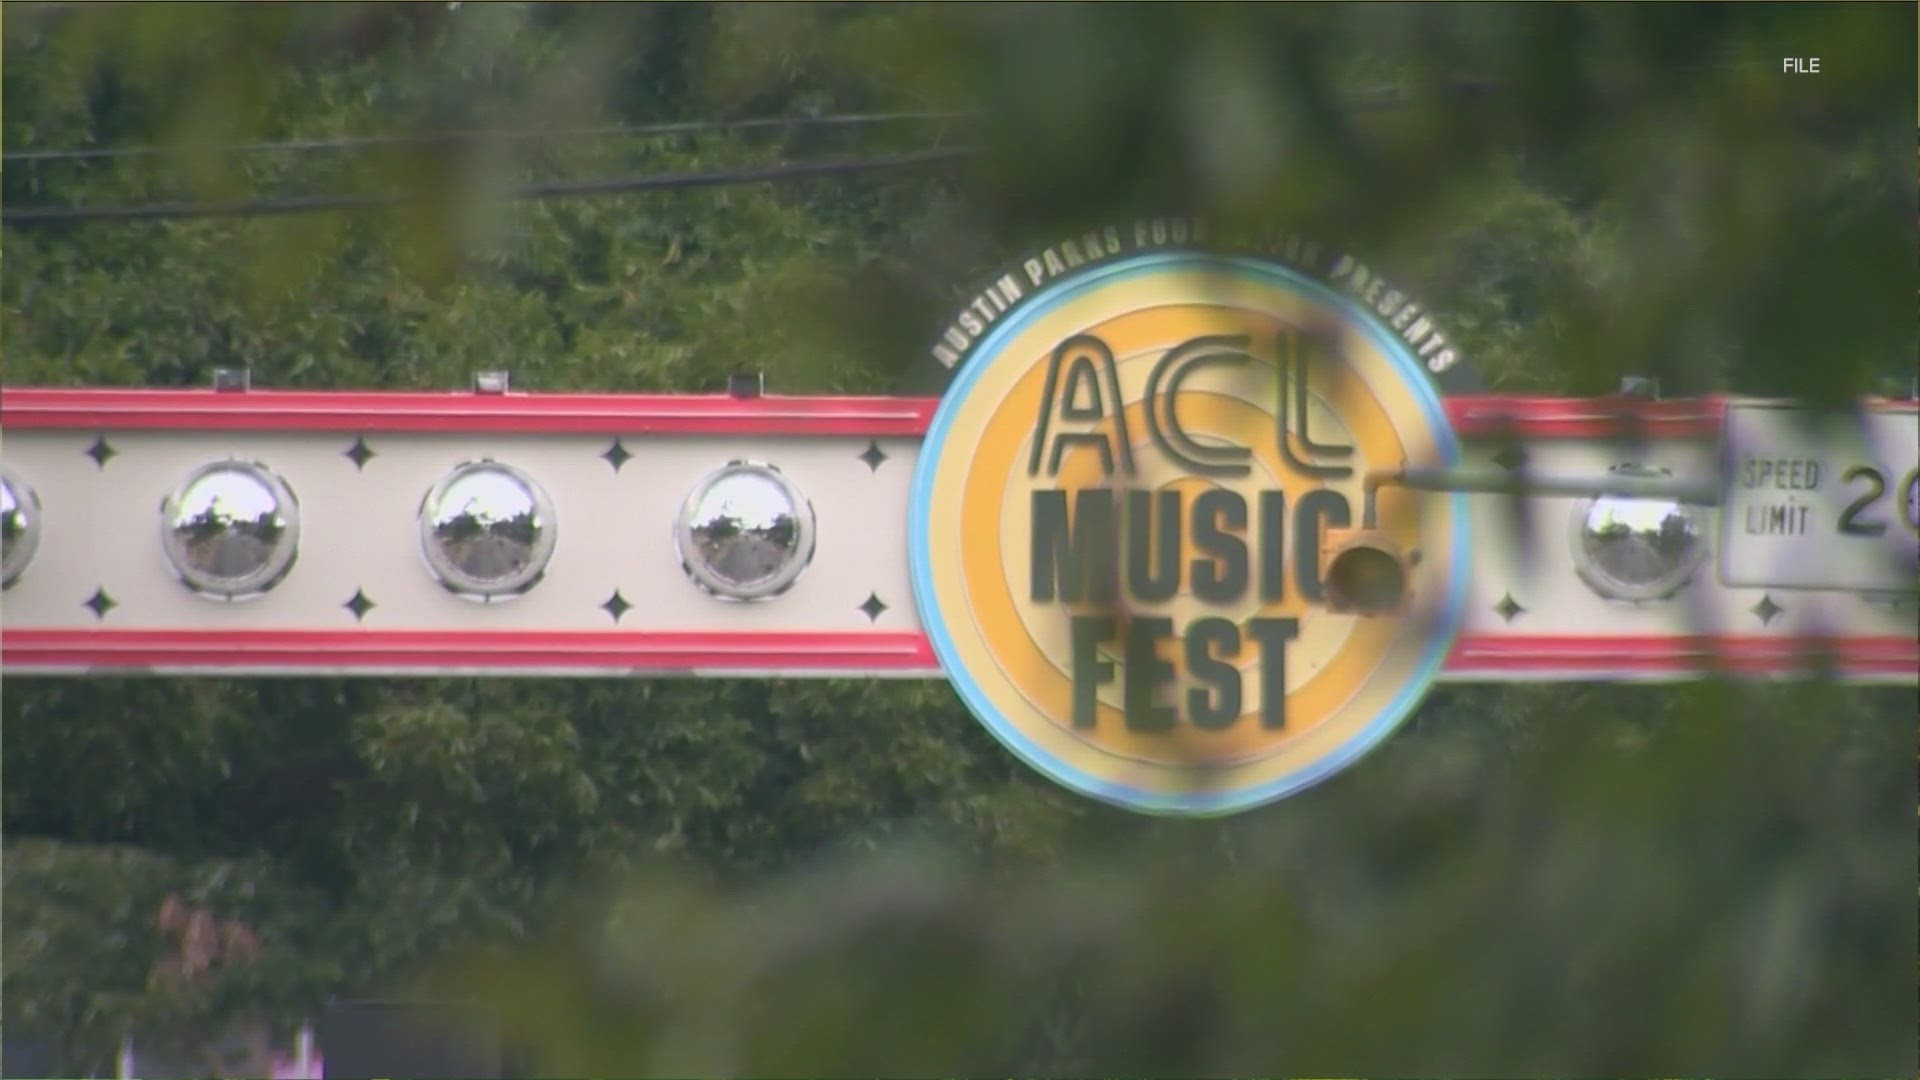 Being outside all day can cause allergy symptoms to flare up. Here are a few things you can do now to help you later when you're out at the ACL Music Festival.